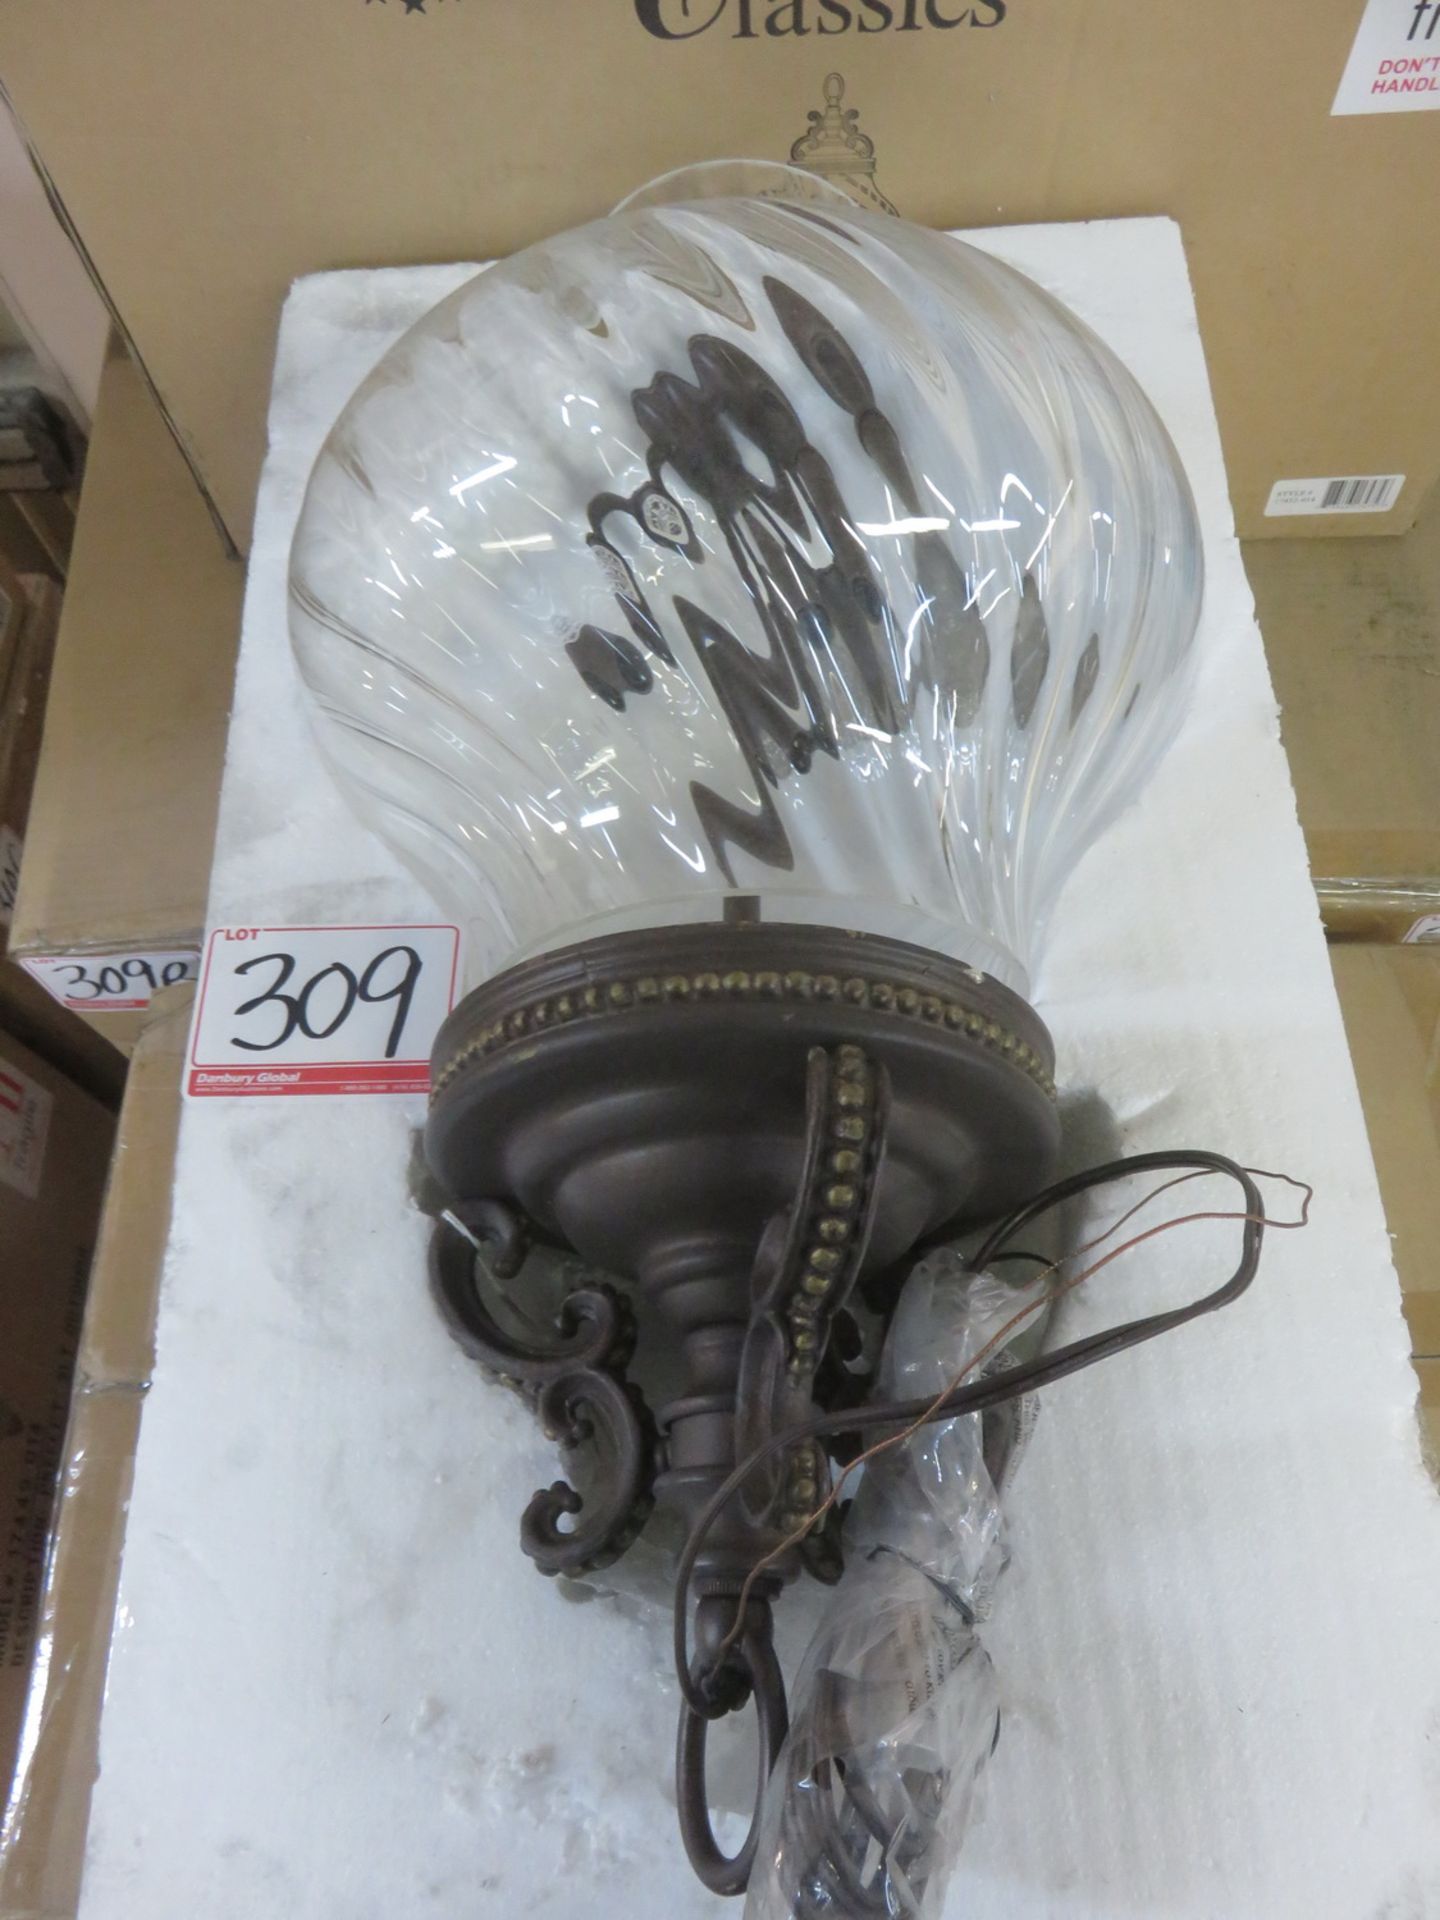 UNITS - EURO CLASSICS 17452014 3-BULB PERFECT OUTDOOR HANGING LIGHTS (NEW IN BOX)